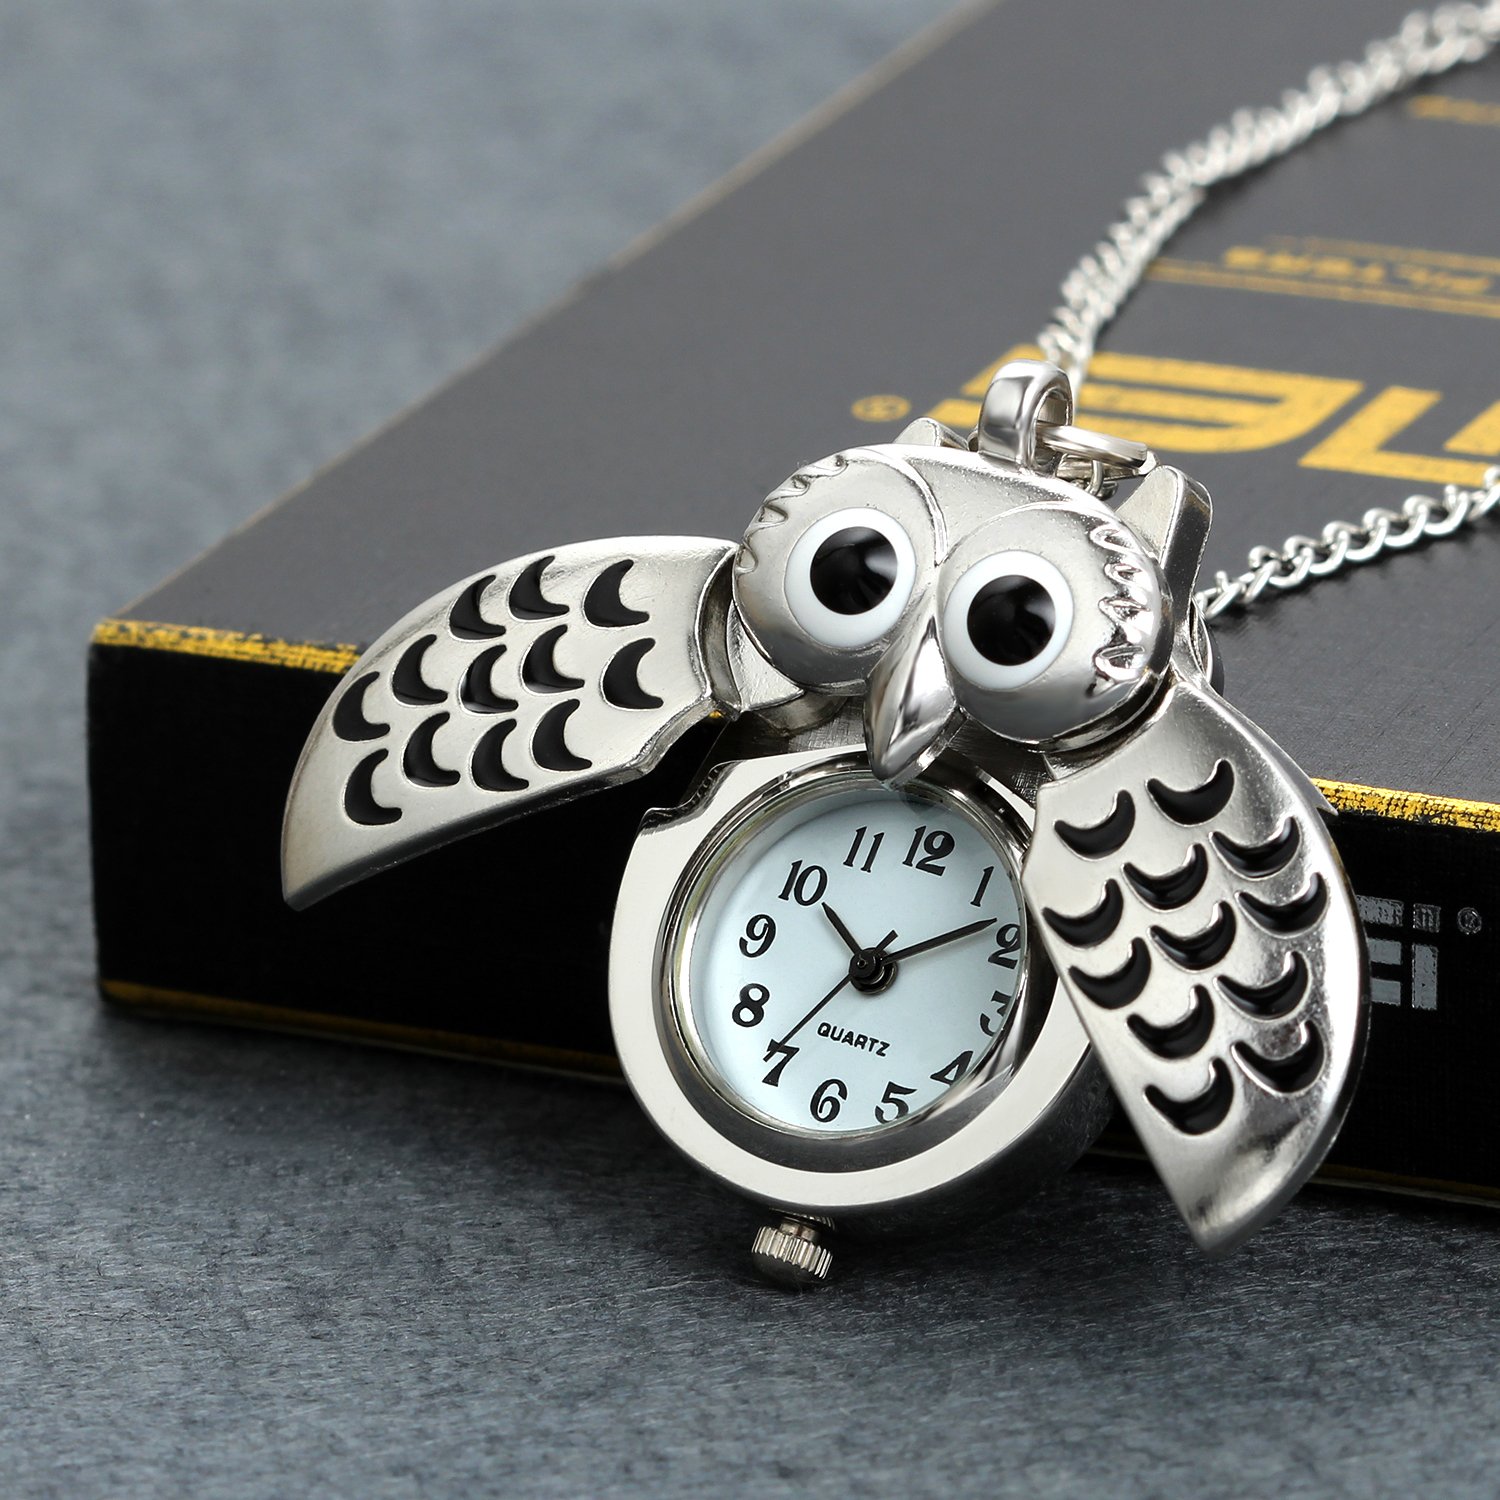 Lancardo Pocket Watch for Men and Women Bright Silver Tone Owl Pocket Fob Watch with Chain Military 24H Time for Mother's Day Father's Day